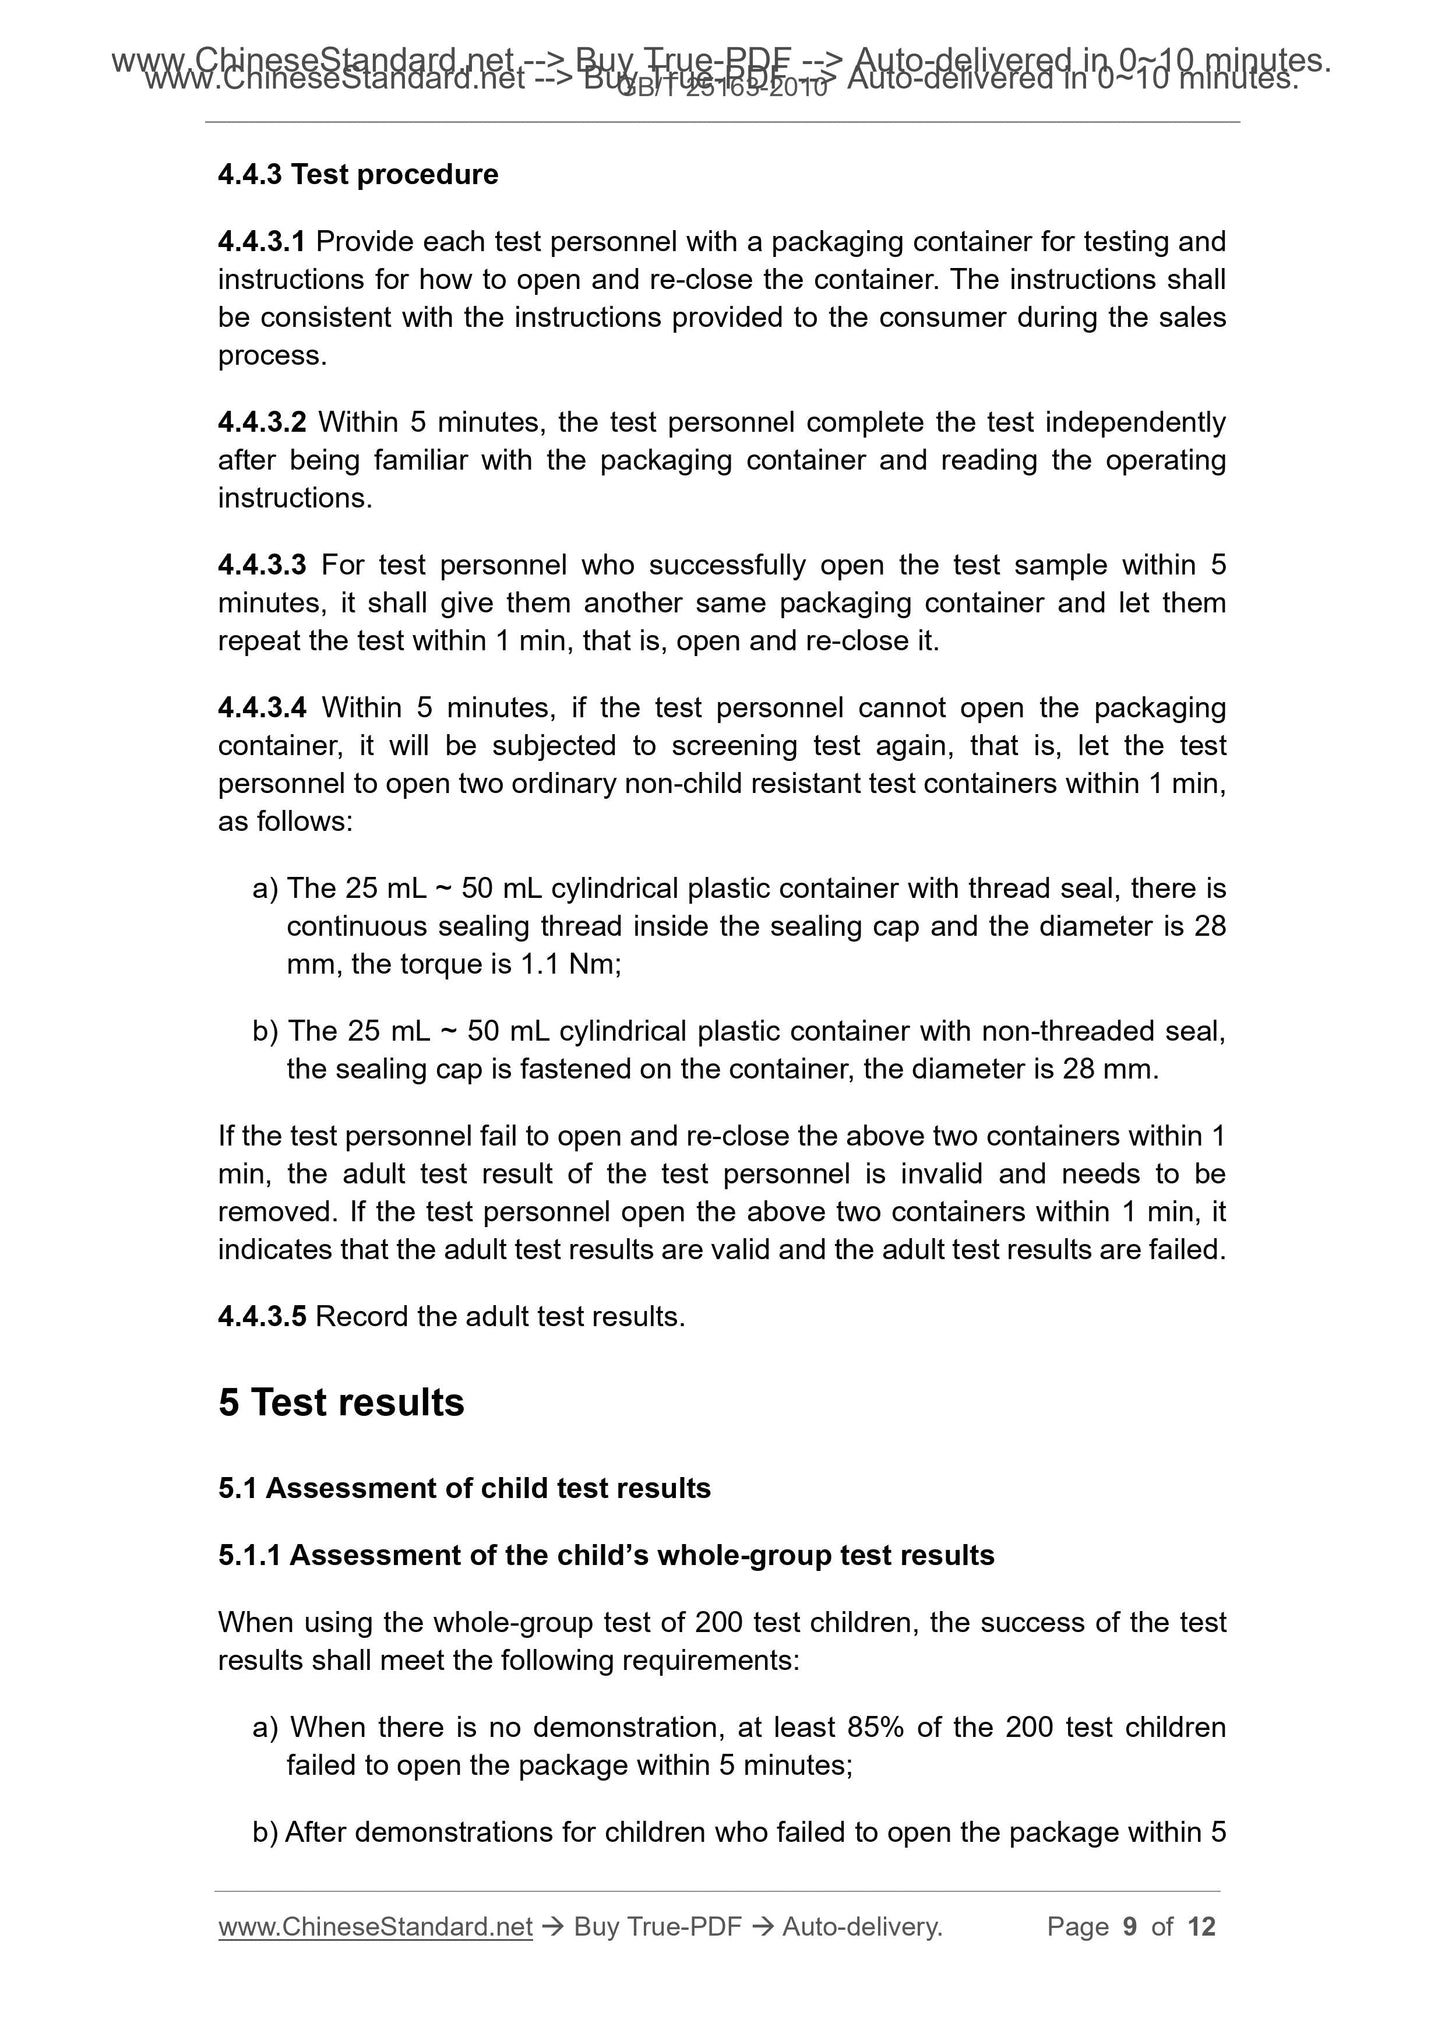 GB/T 25163-2010 Page 5